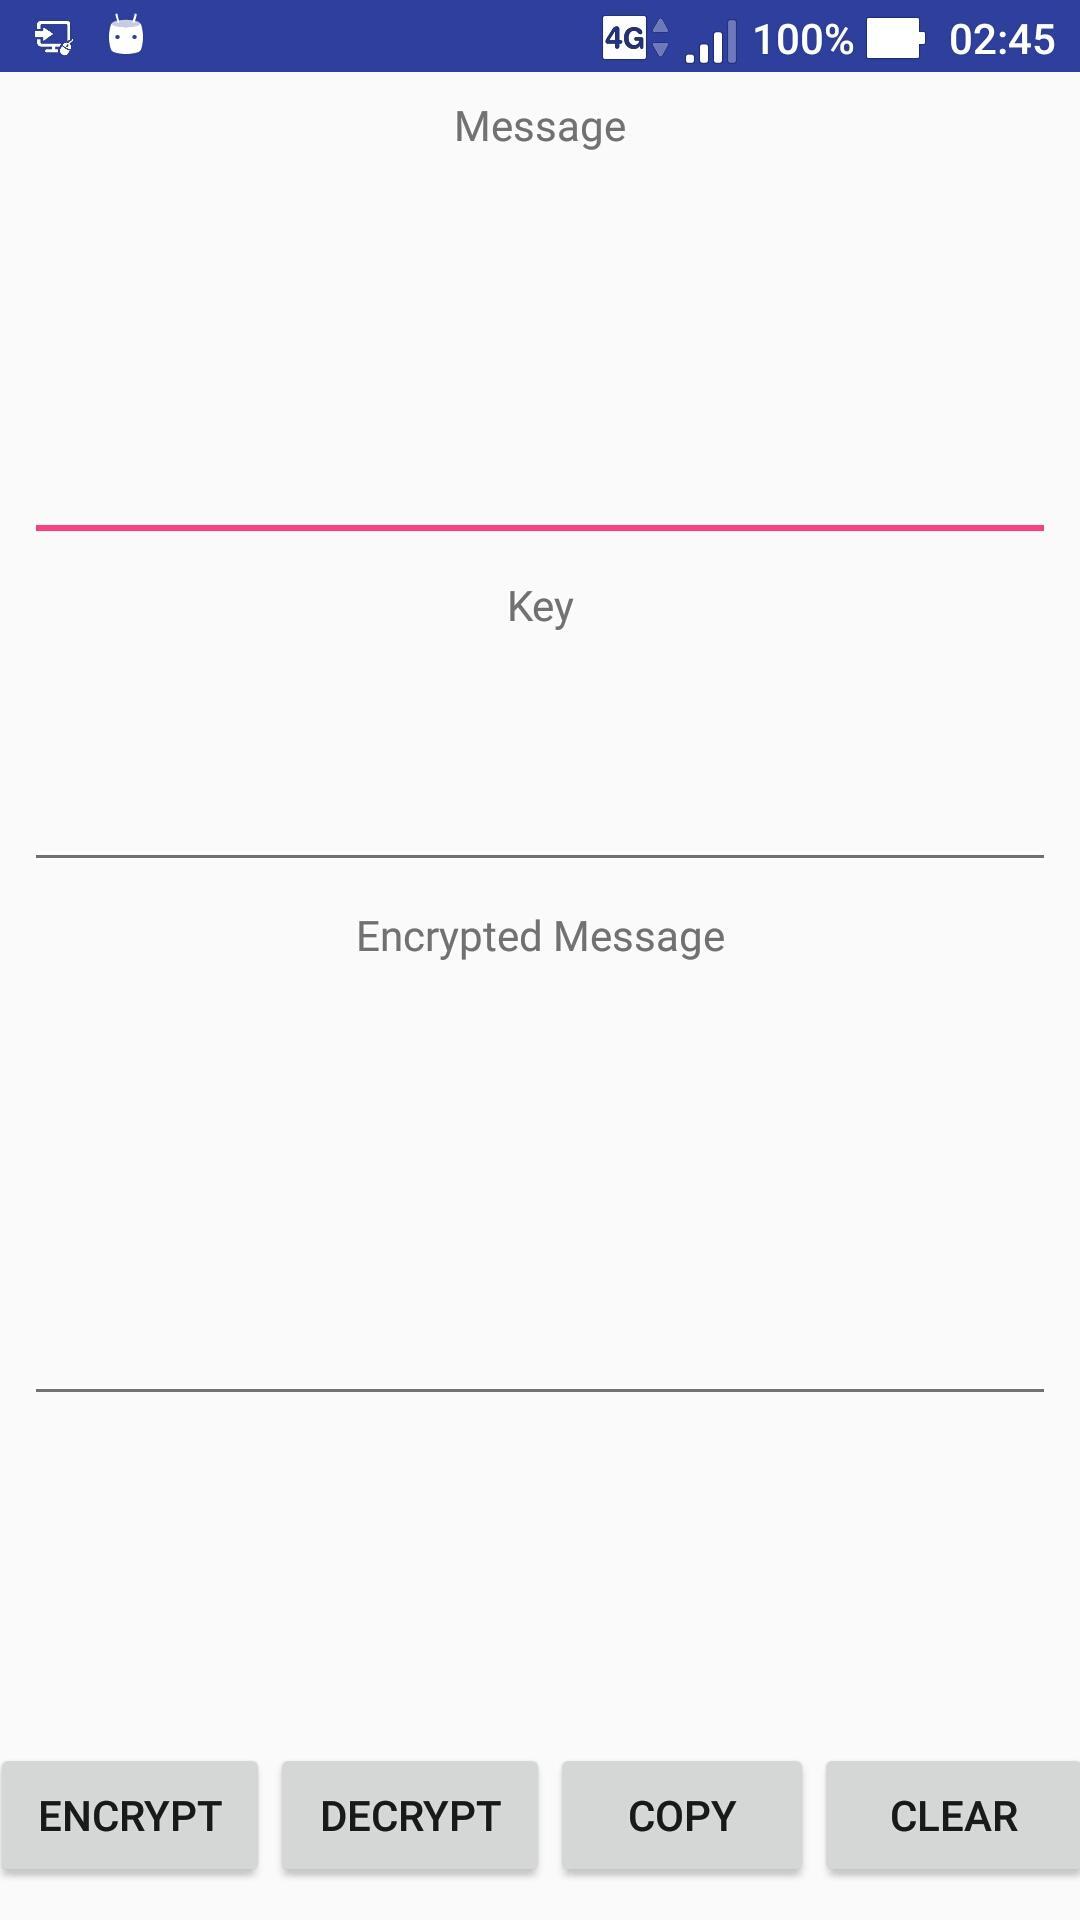 Encrypt message. Encrypted message.